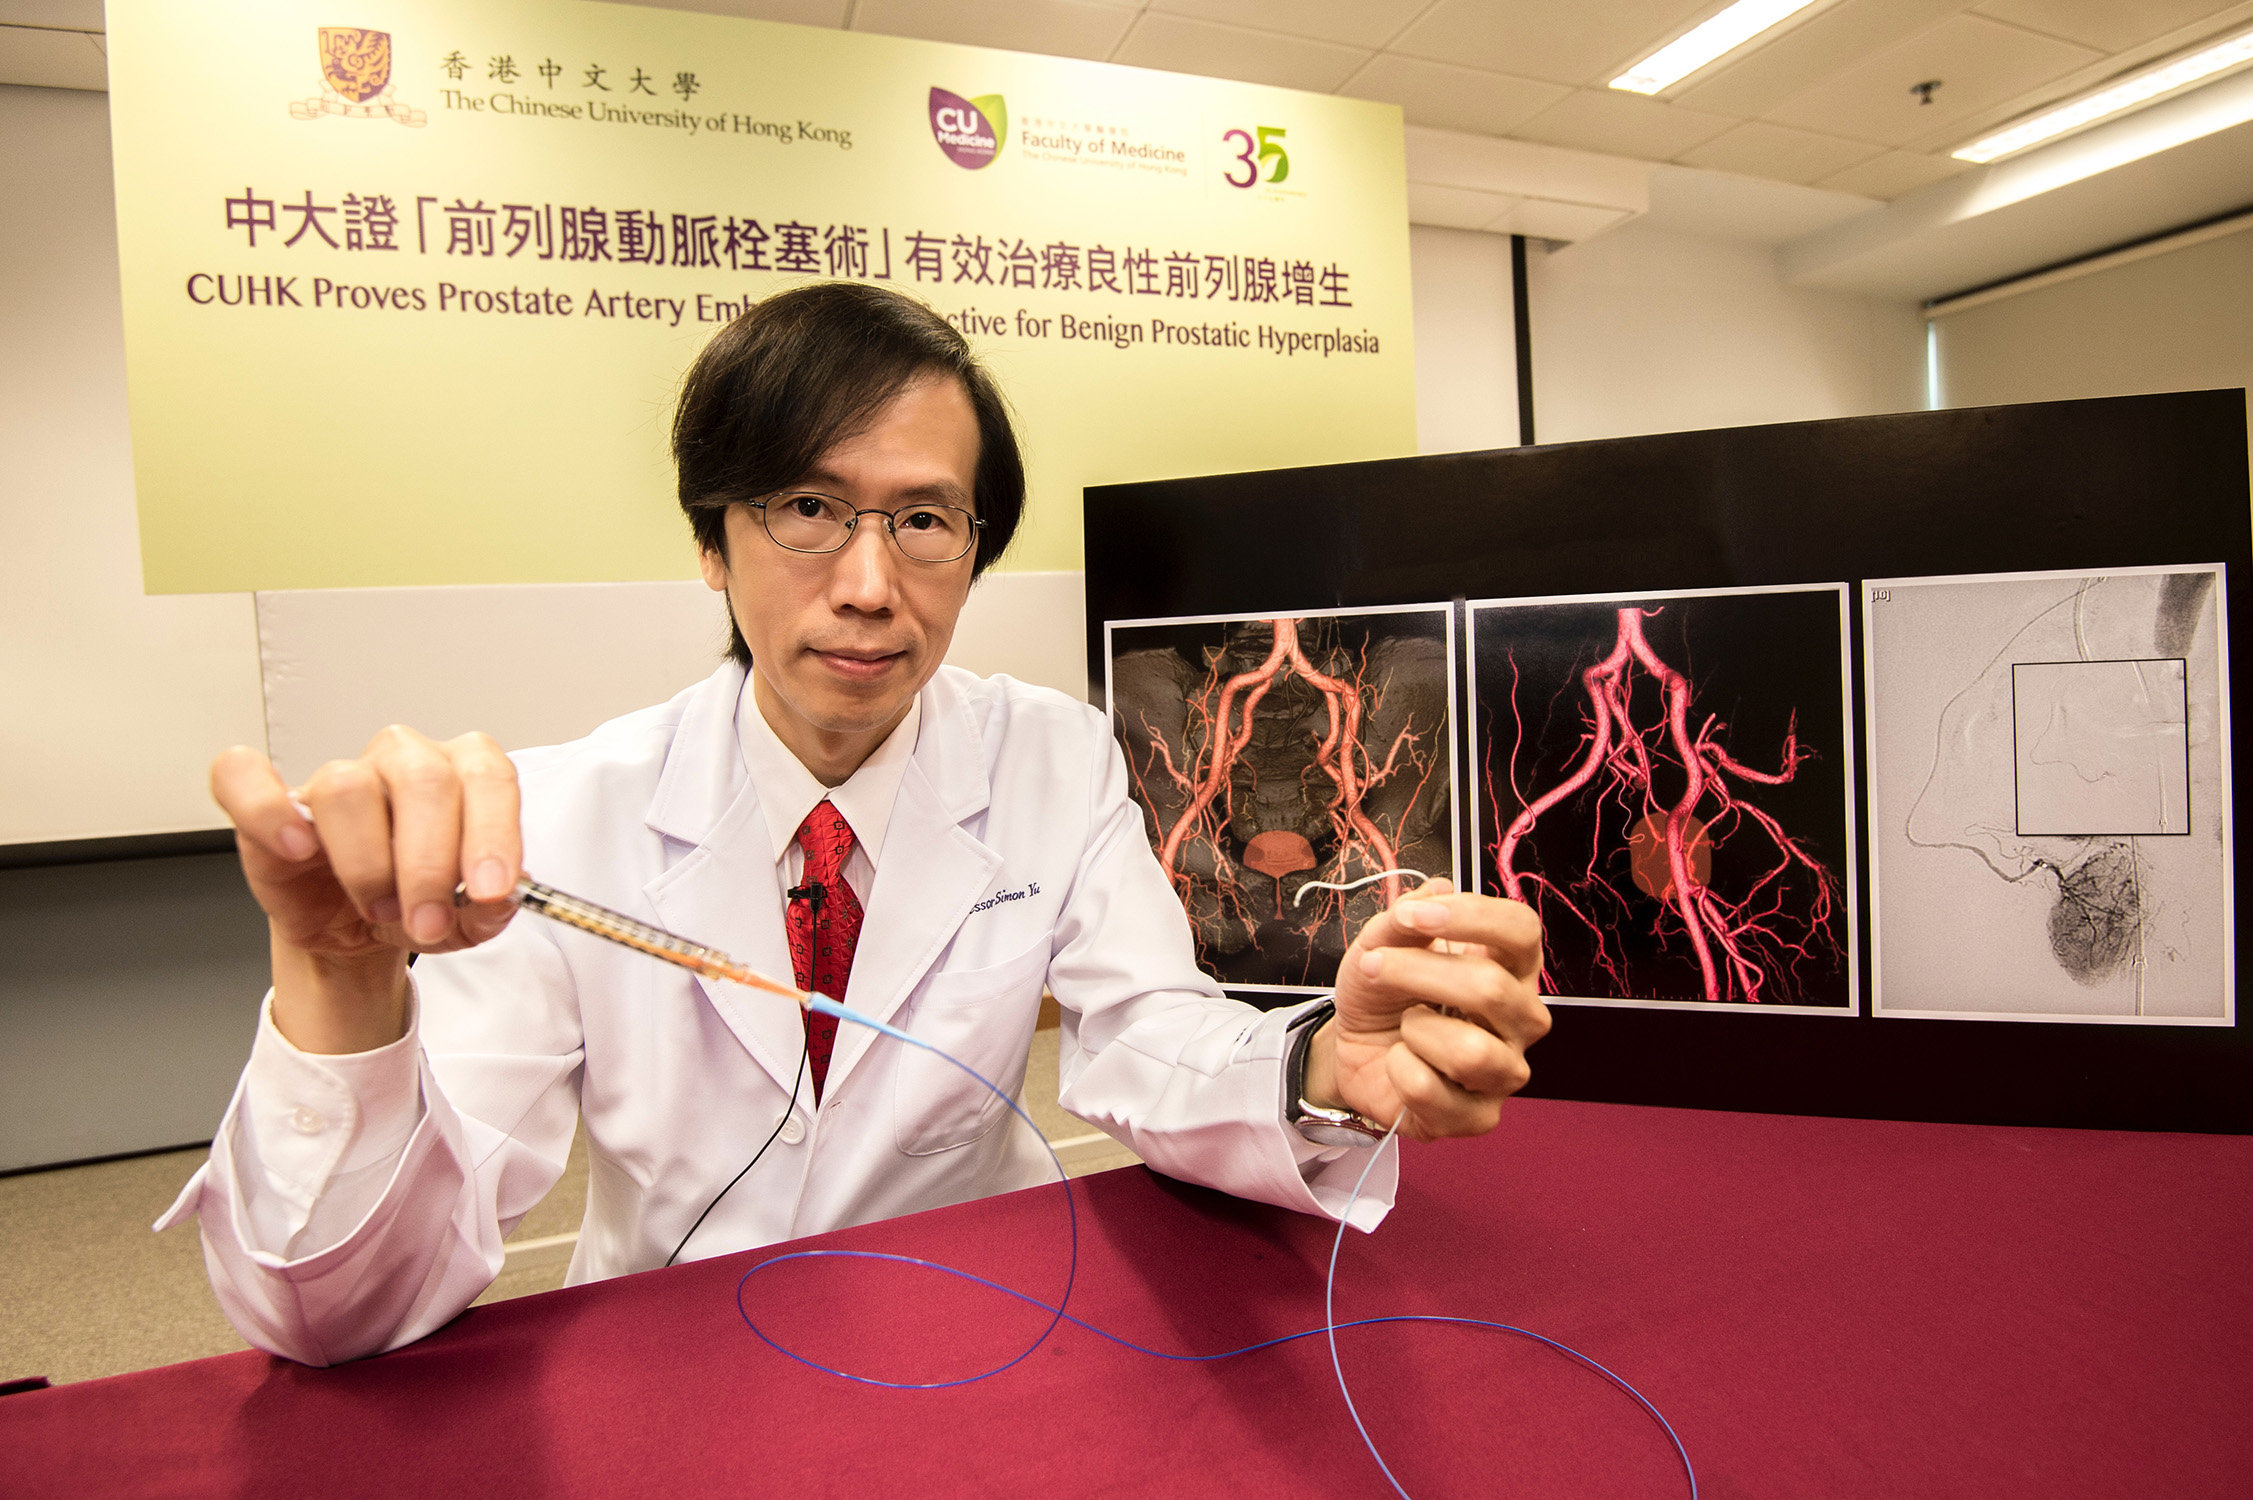 Prof. Simon YU, Chairman, Department of Imaging and Interventional Radiology, Faculty of Medicine, CUHK and Director of the Vascular and Interventional Radiology Foundation Clinical Science Centre, proves in his recent study that Prostate Artery Embolization is a highly effective treatment for Benign Prostatic Hyperplasia, with success rates of 90%.